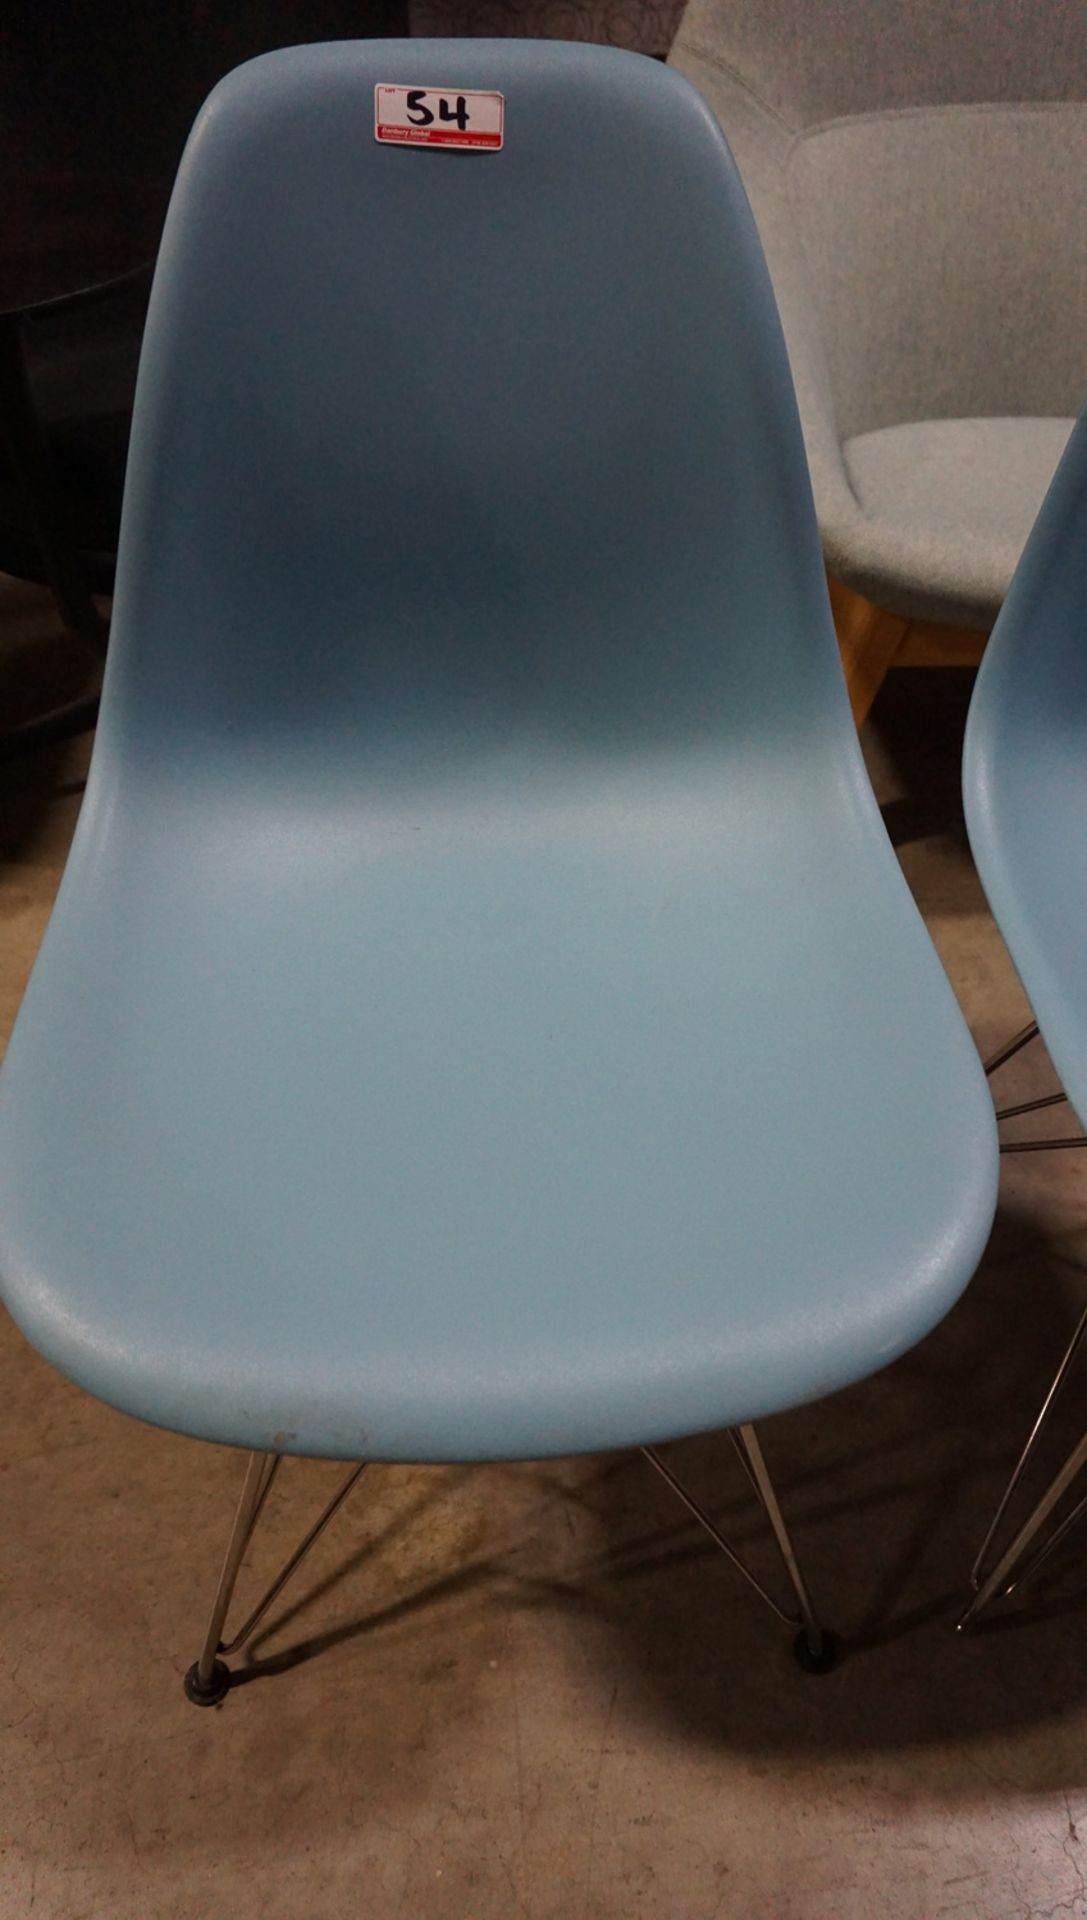 UNITS - HERMAN MILLER EAMES MOLDED PLASTIC SHELL CHAIR W/ EIFFEL TOWER BASE (BLUE) (MSRP $550) - Image 2 of 2